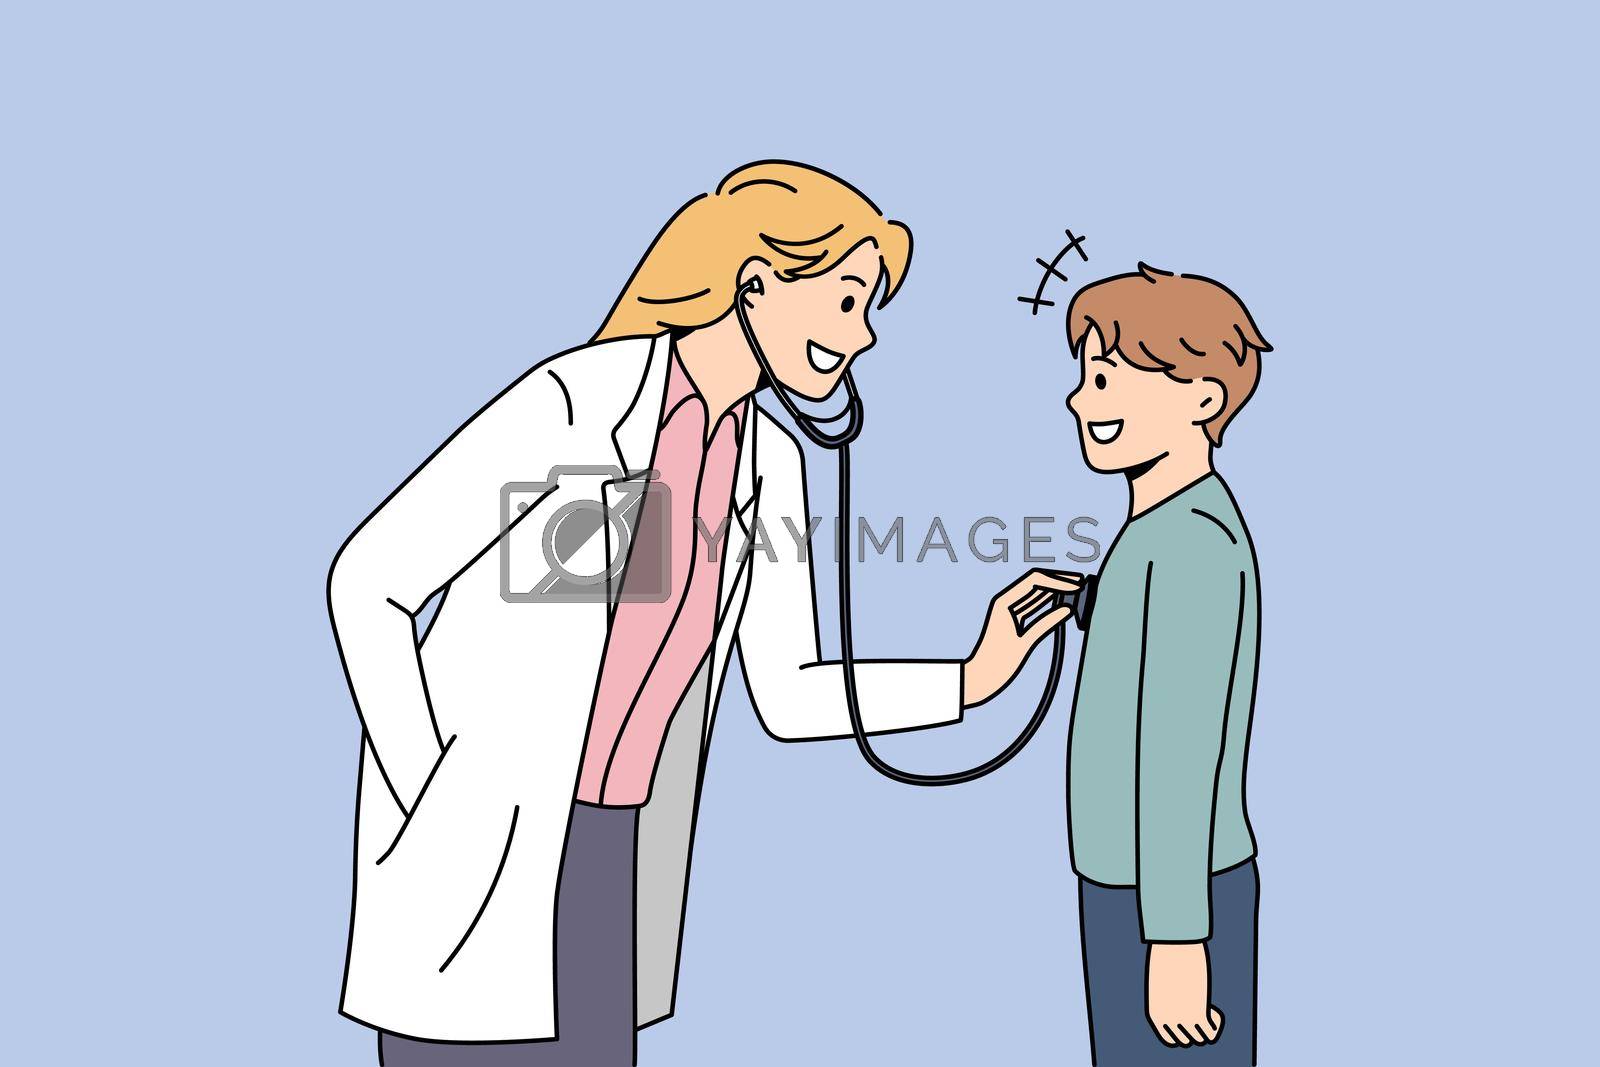 Pediatrician working in healthcare concept. Young smiling woman pediatrician standing and examining little boy patient with stethoscope vector illustration